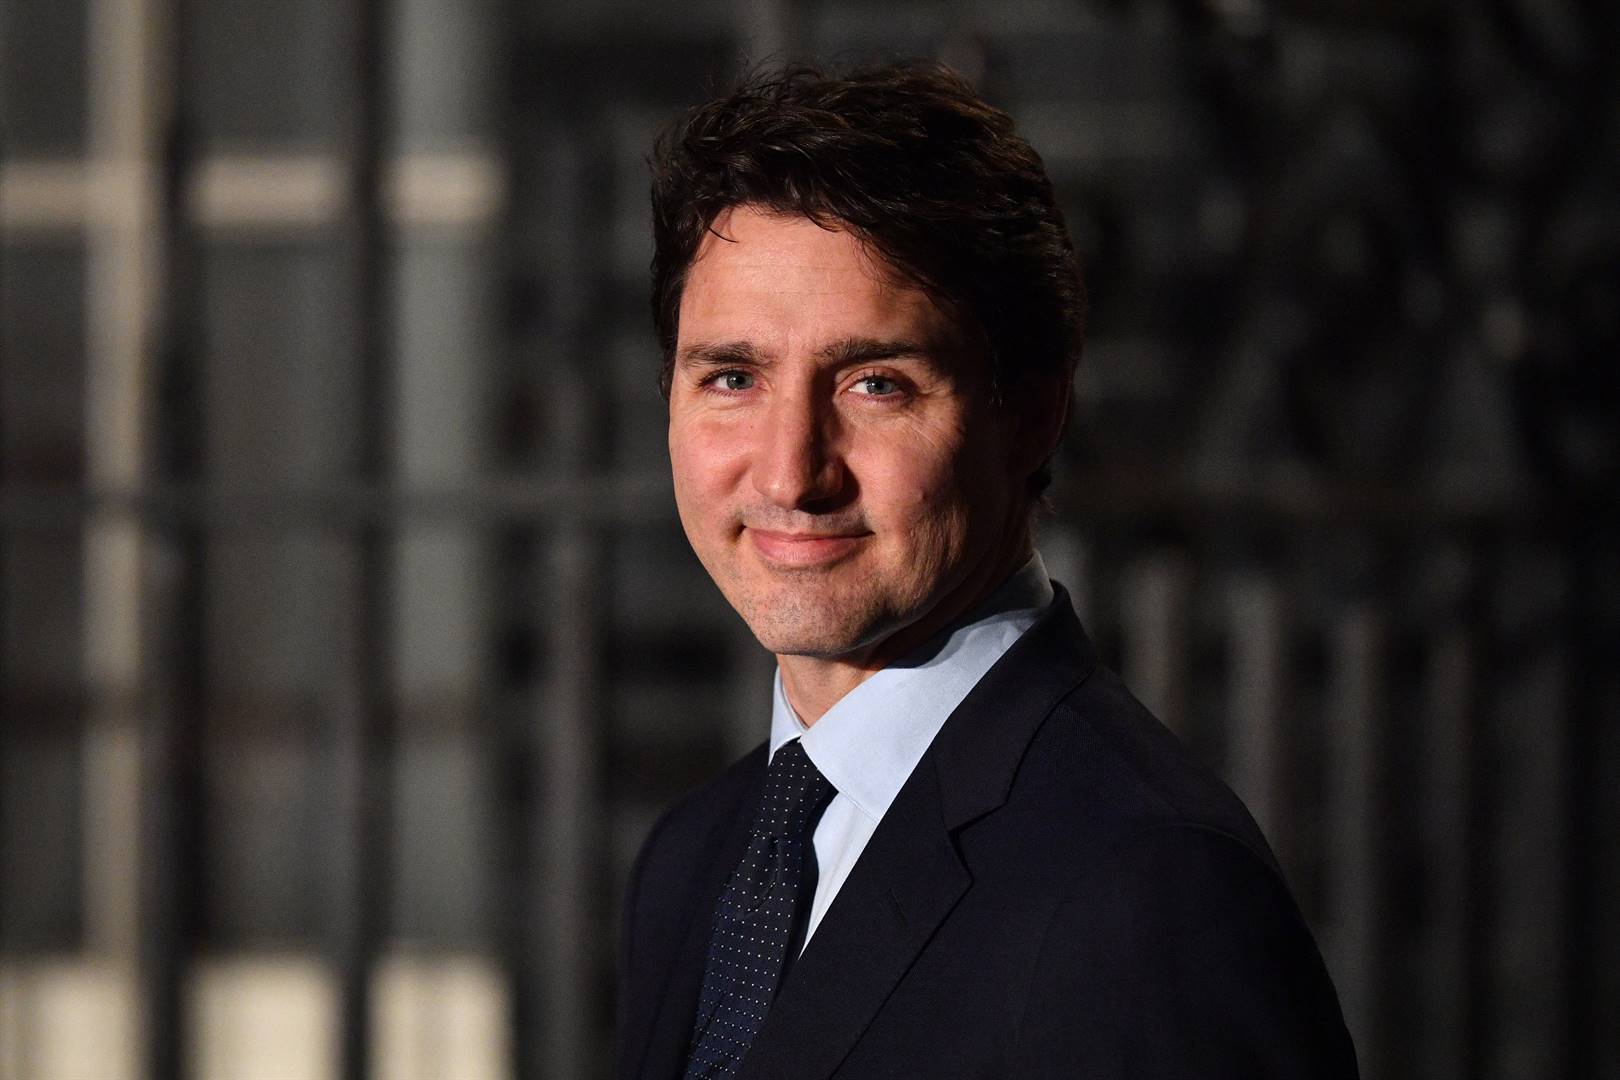 Justin Trudeau, Canadian Prime Minister. Photo: Getty Images